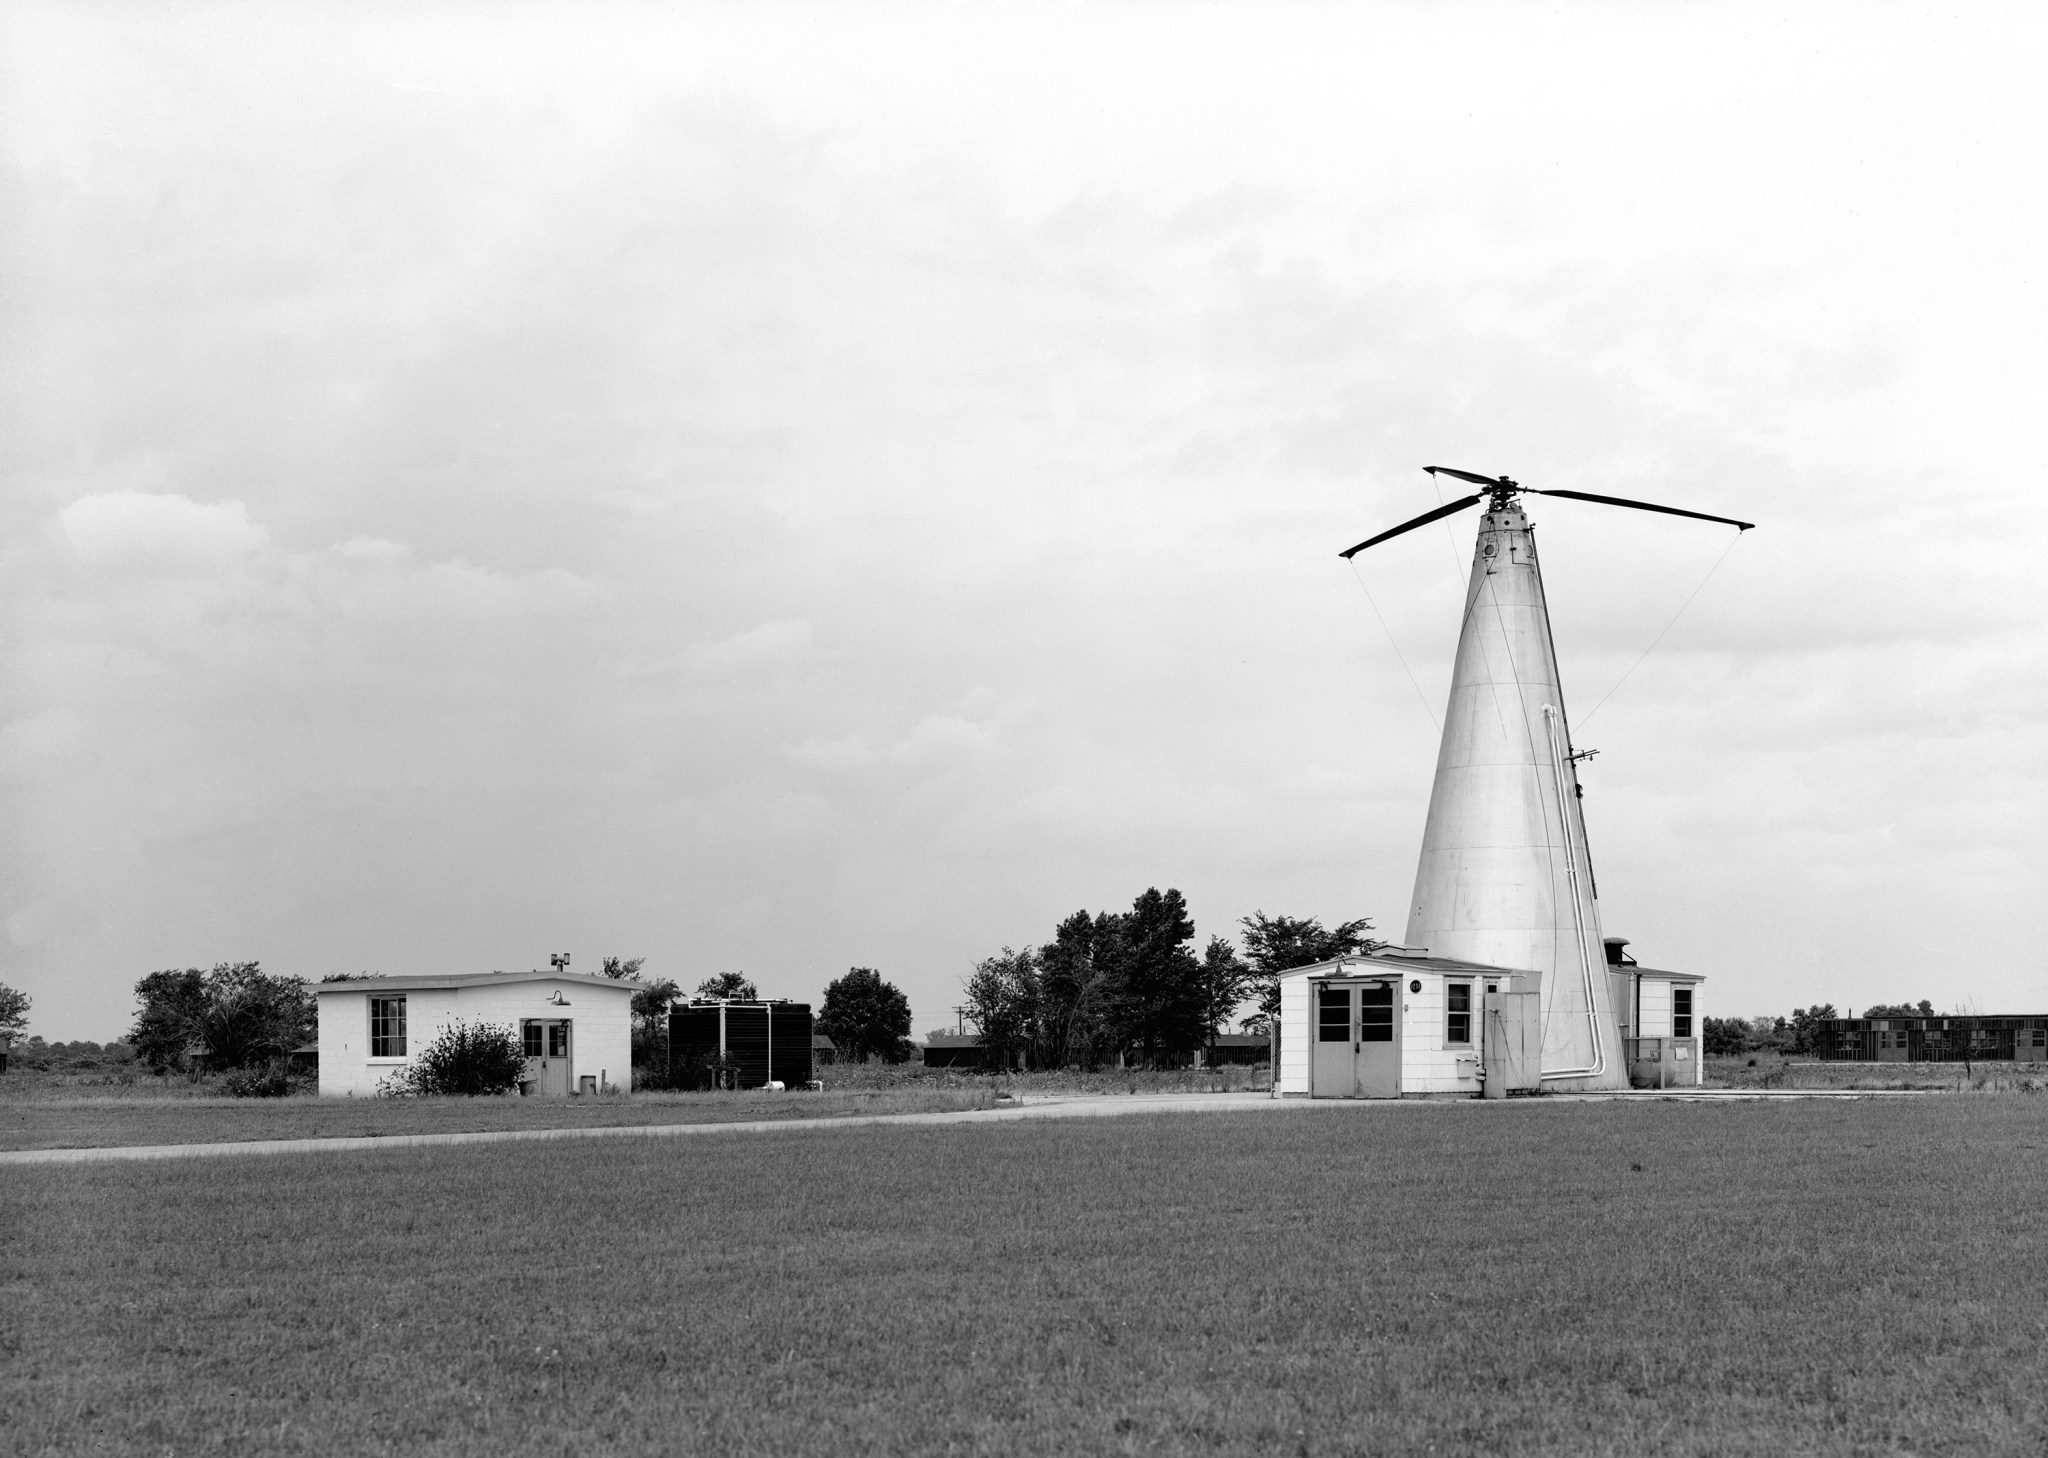 Exterior photo of the Helicopter Rotor Test Facility taken in 1947.